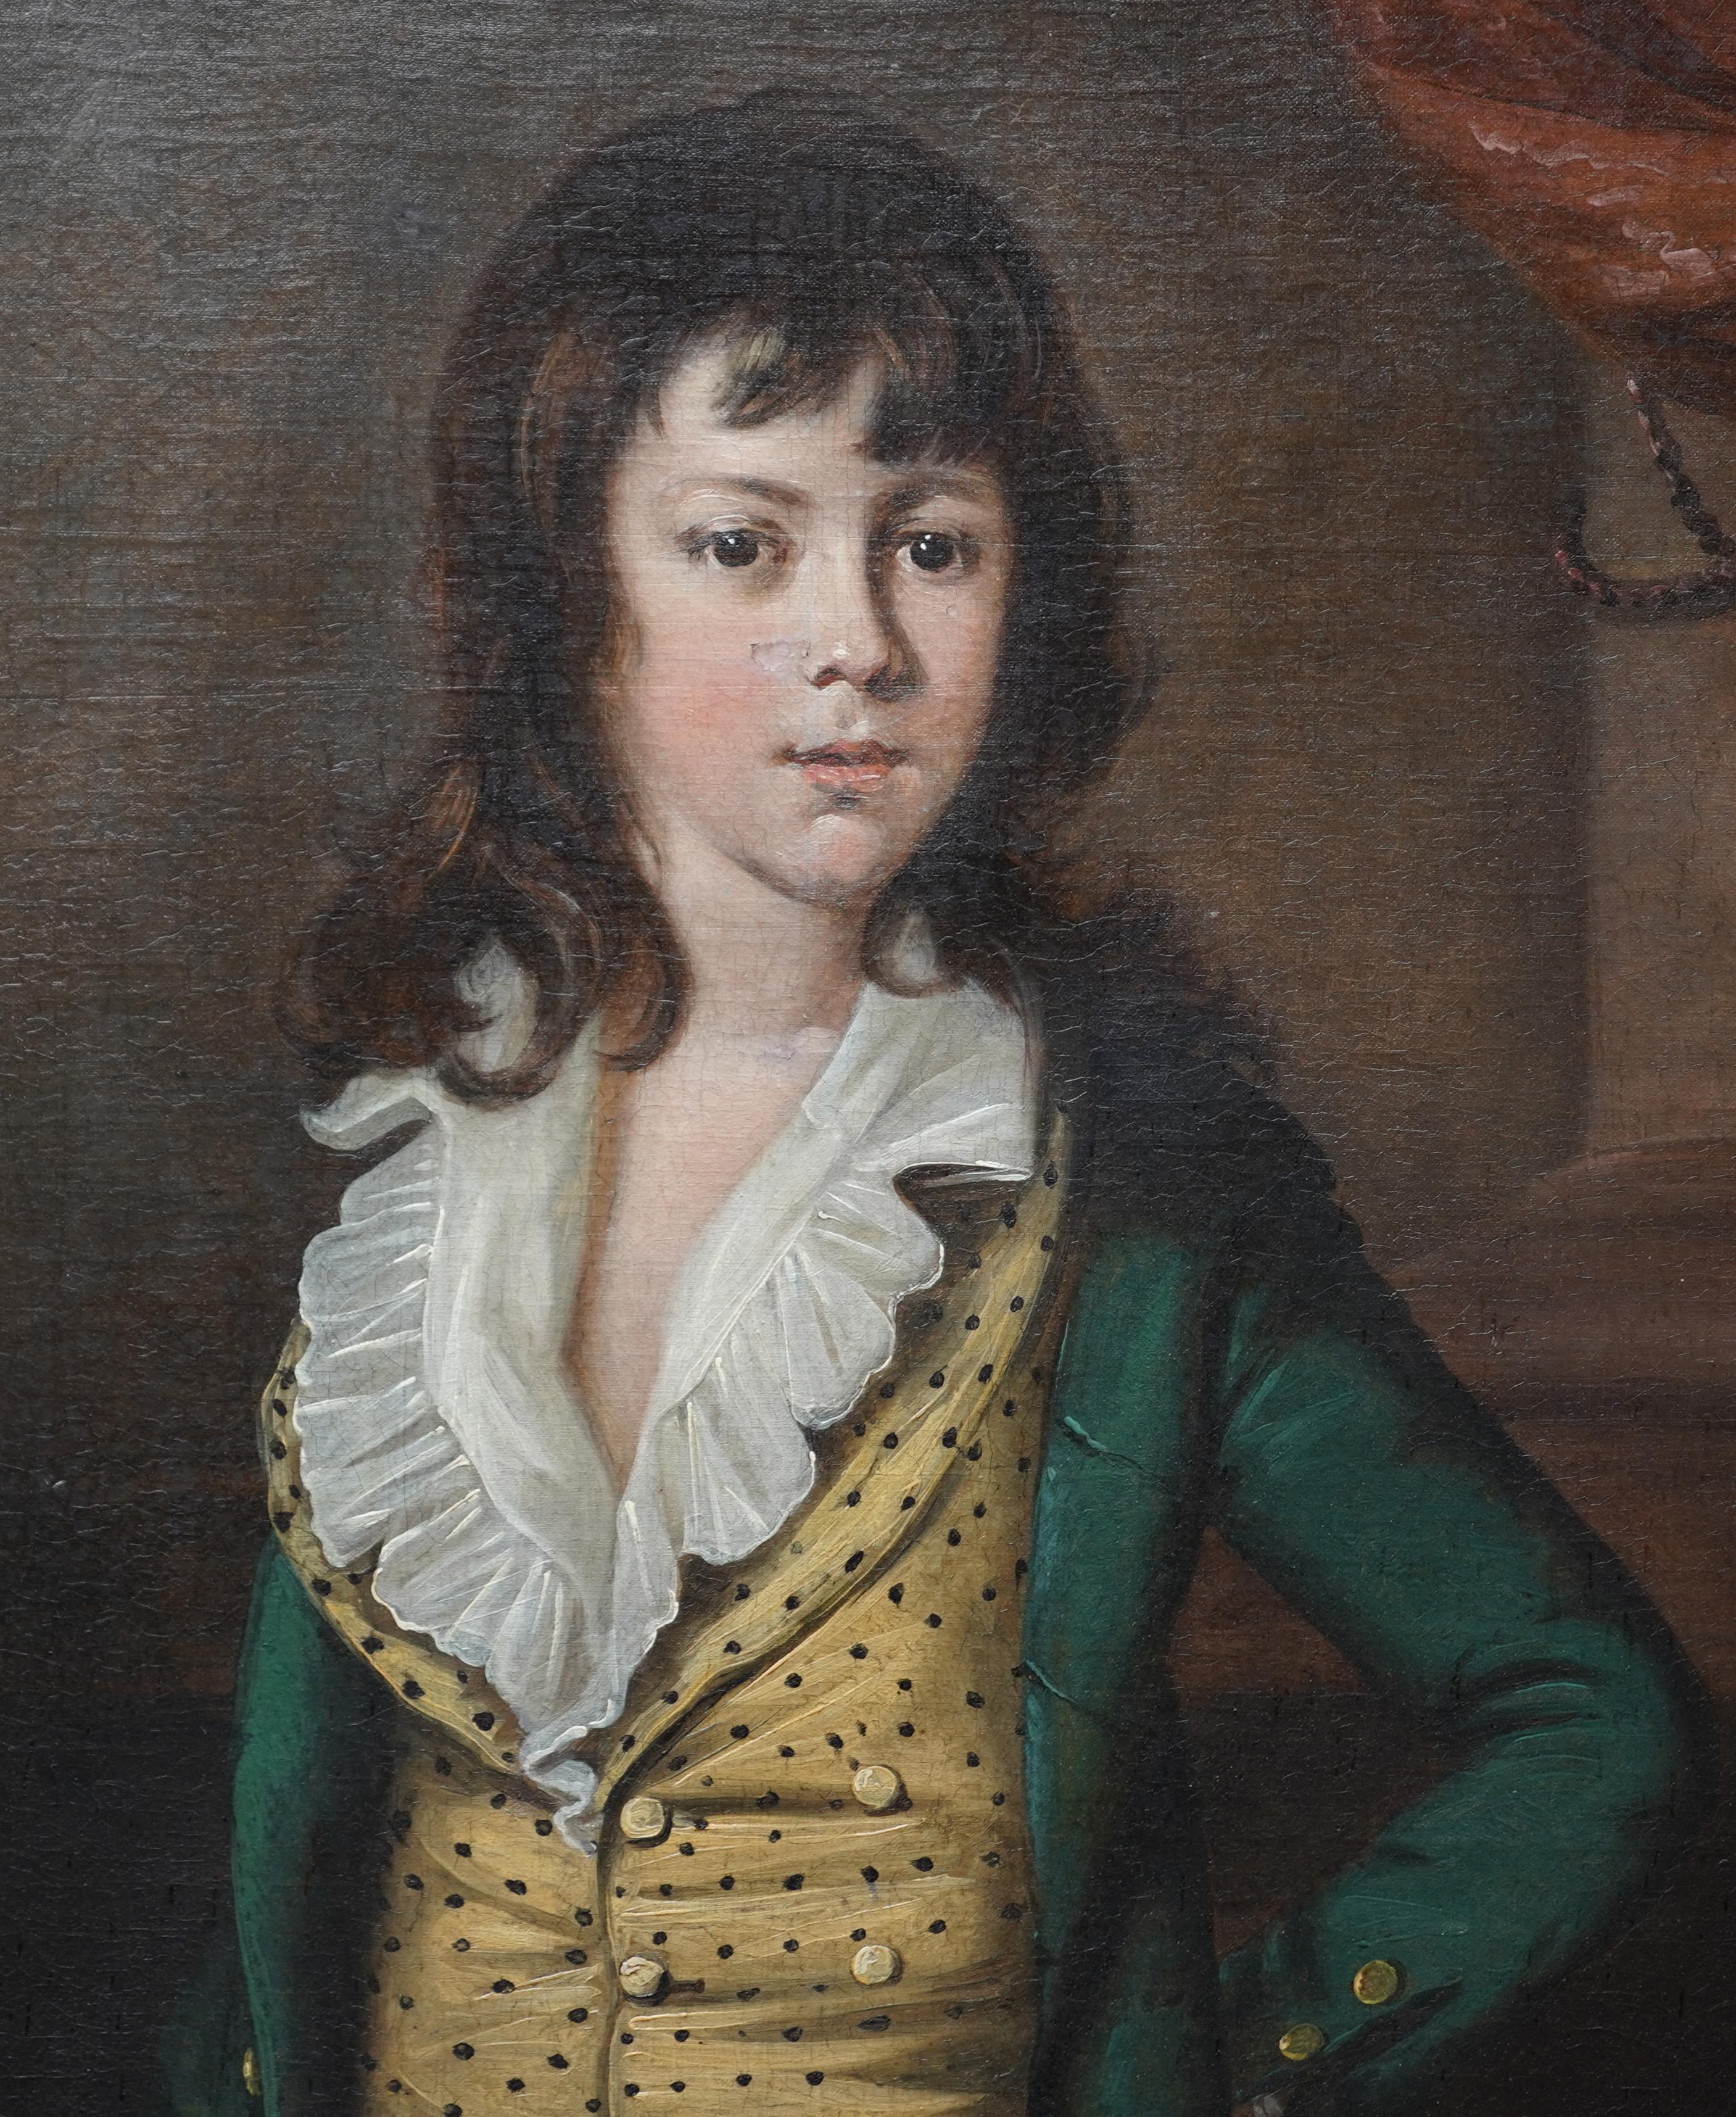 Portrait of Boy in Yellow Waistcoat - British 18thC art Old Master oil painting - Old Masters Painting by John Berridge